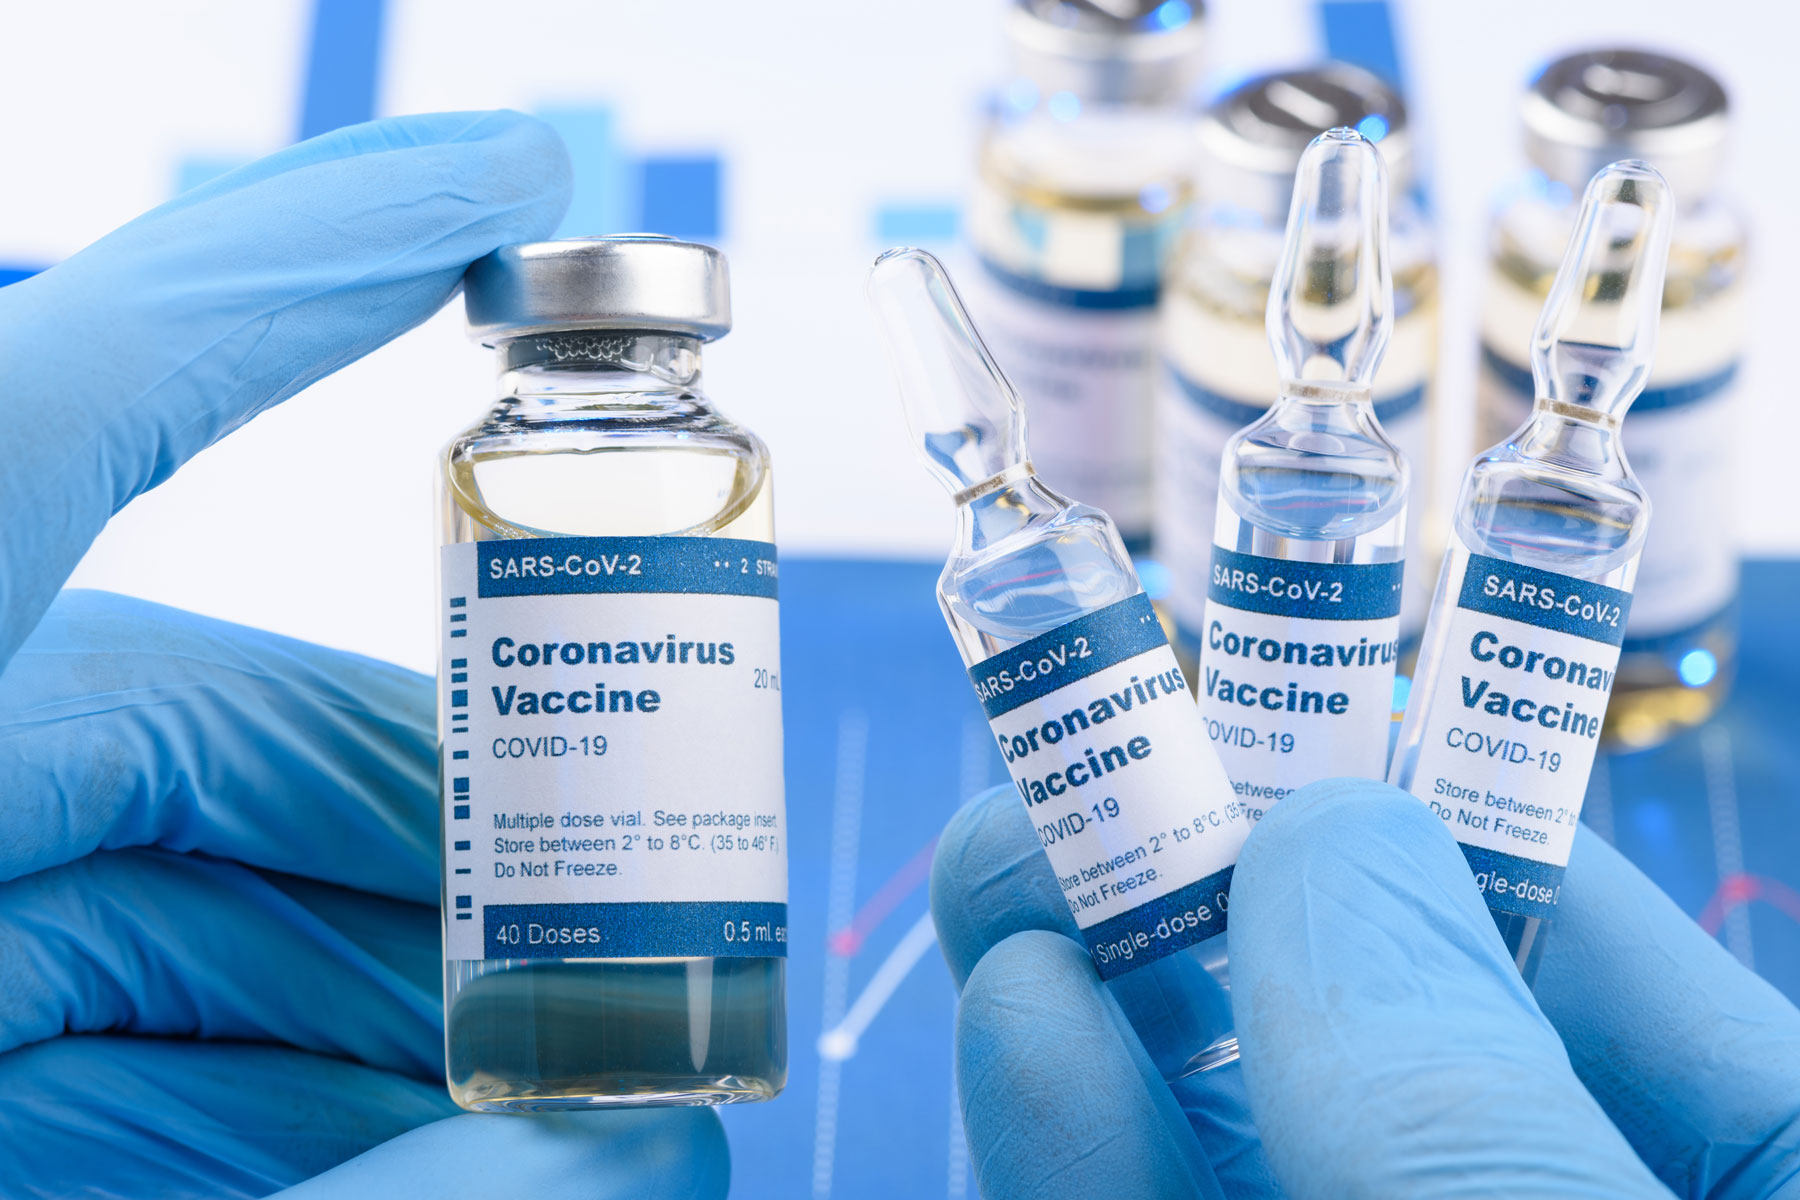 Study of Pfizer COVID vaccine suggests some people got highly dangerous shots